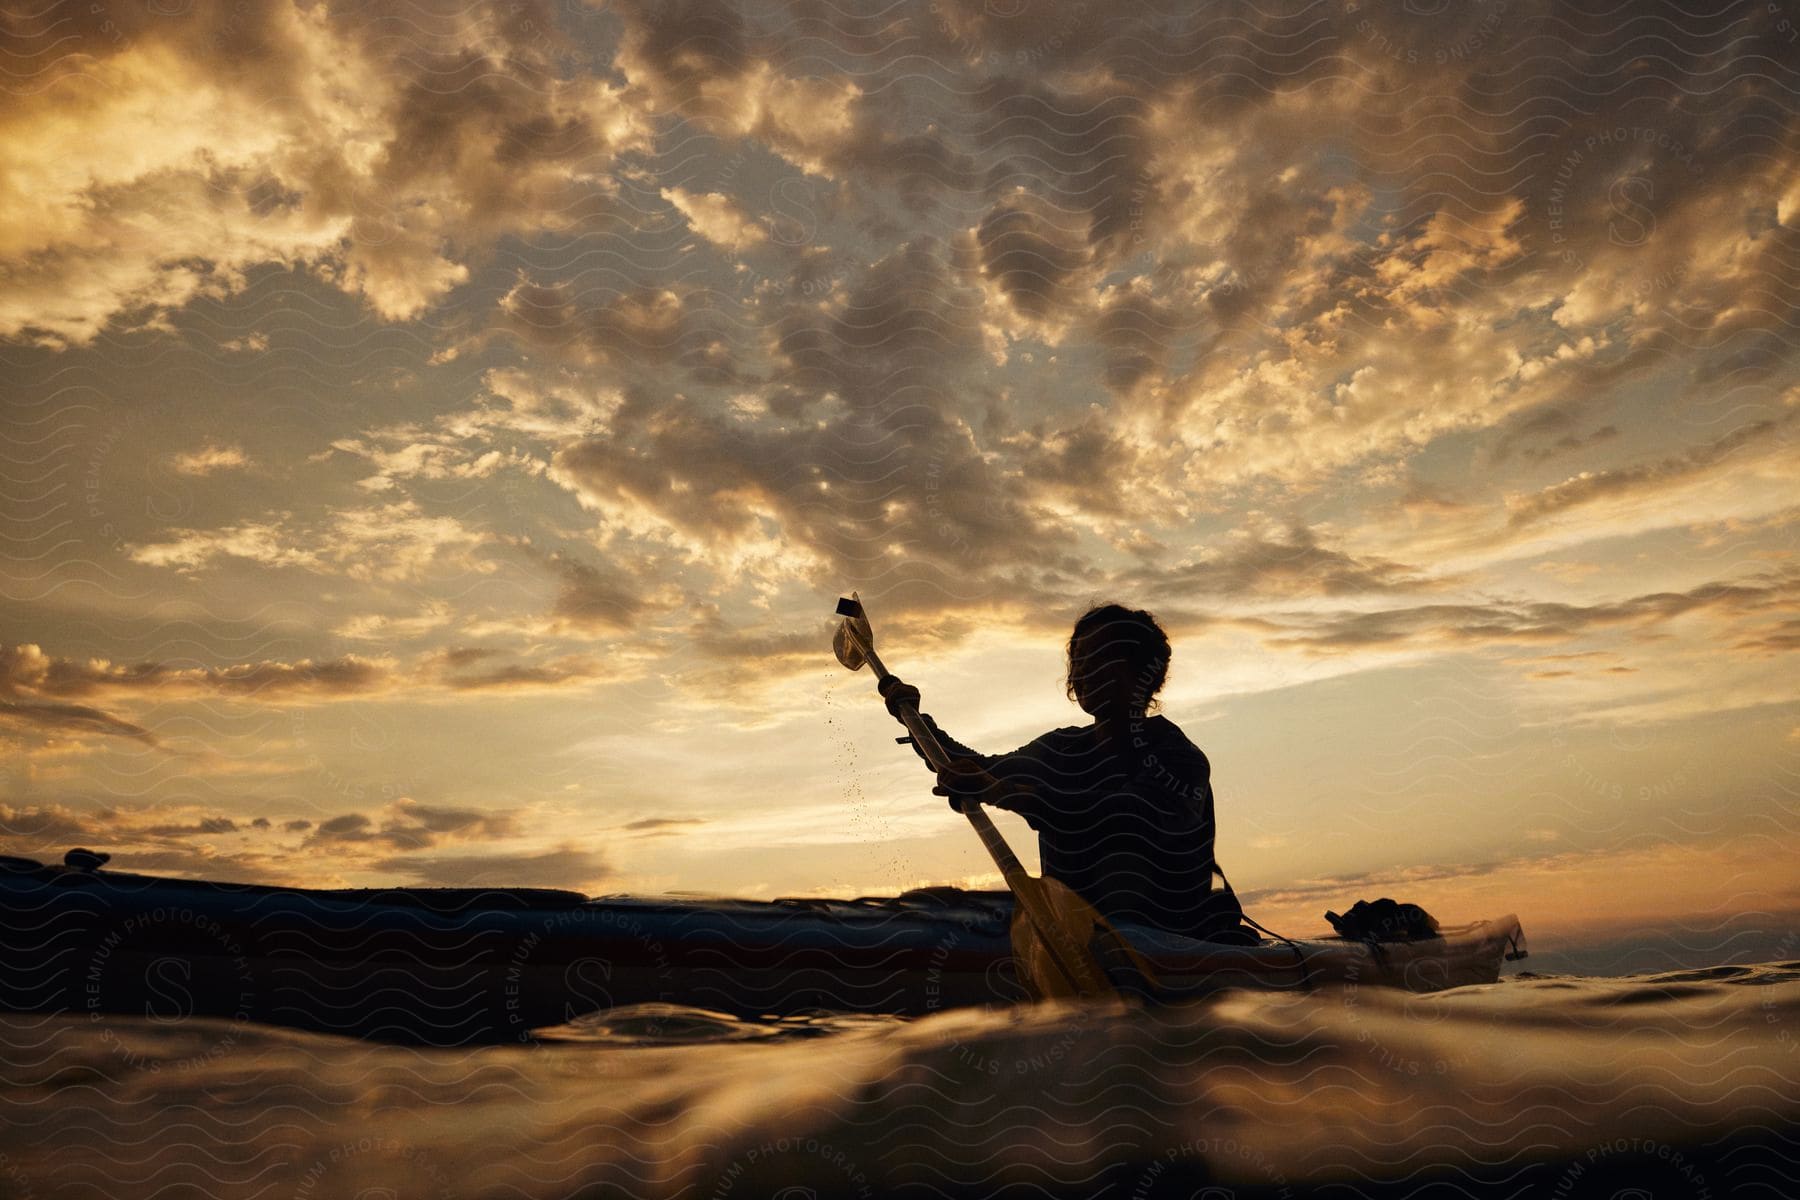 person silhouette paddles canoe at dusk